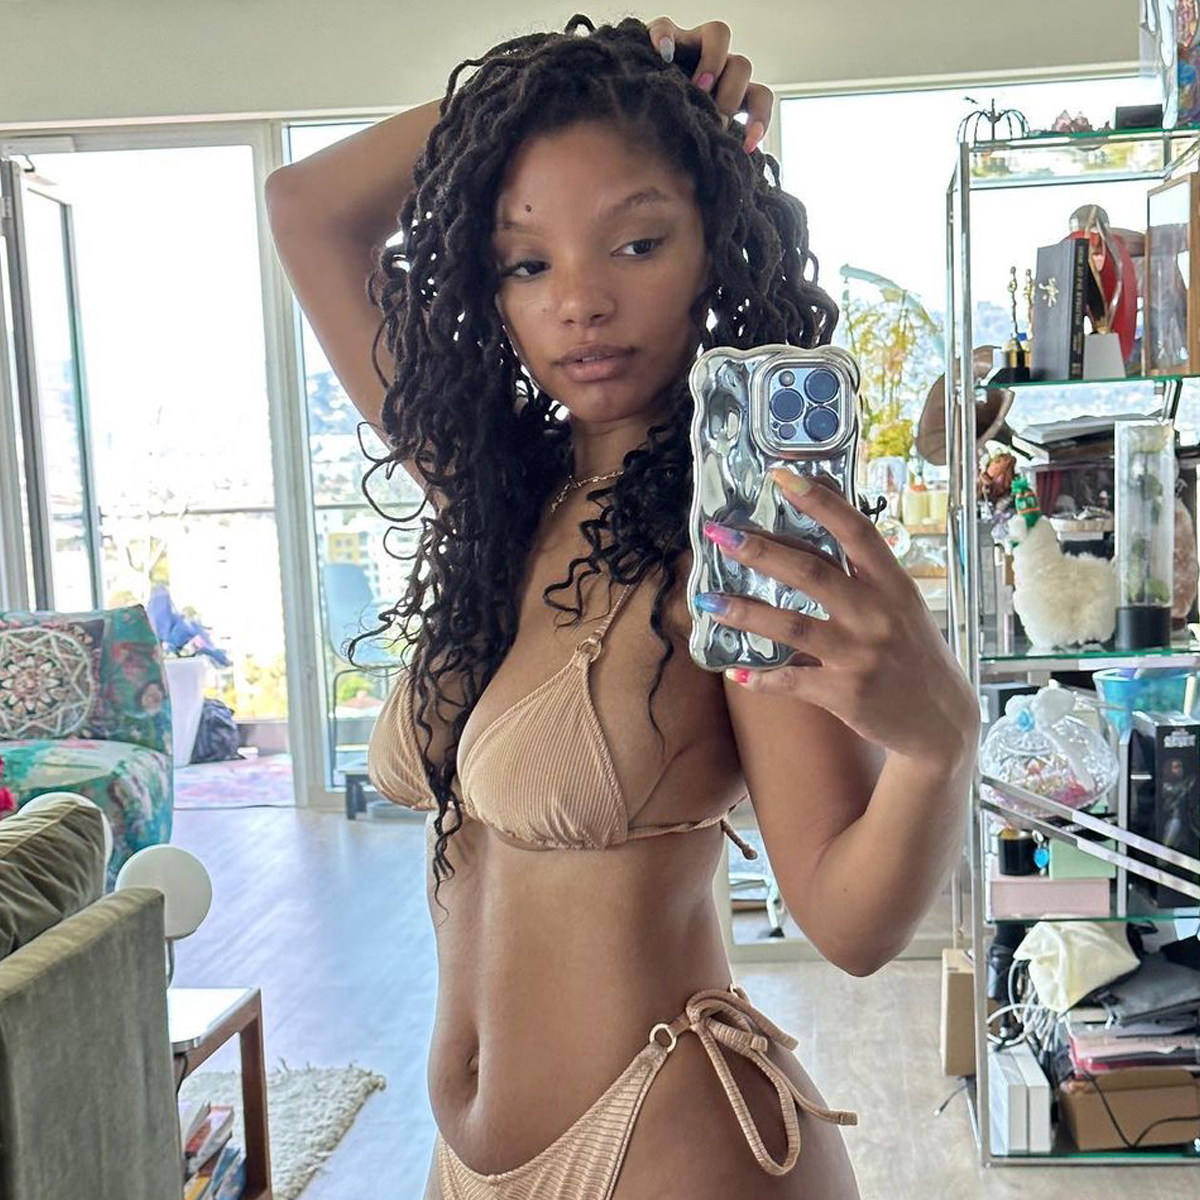 Halle Bailey Shares She's Suffering From "Severe" Postpartum Depression